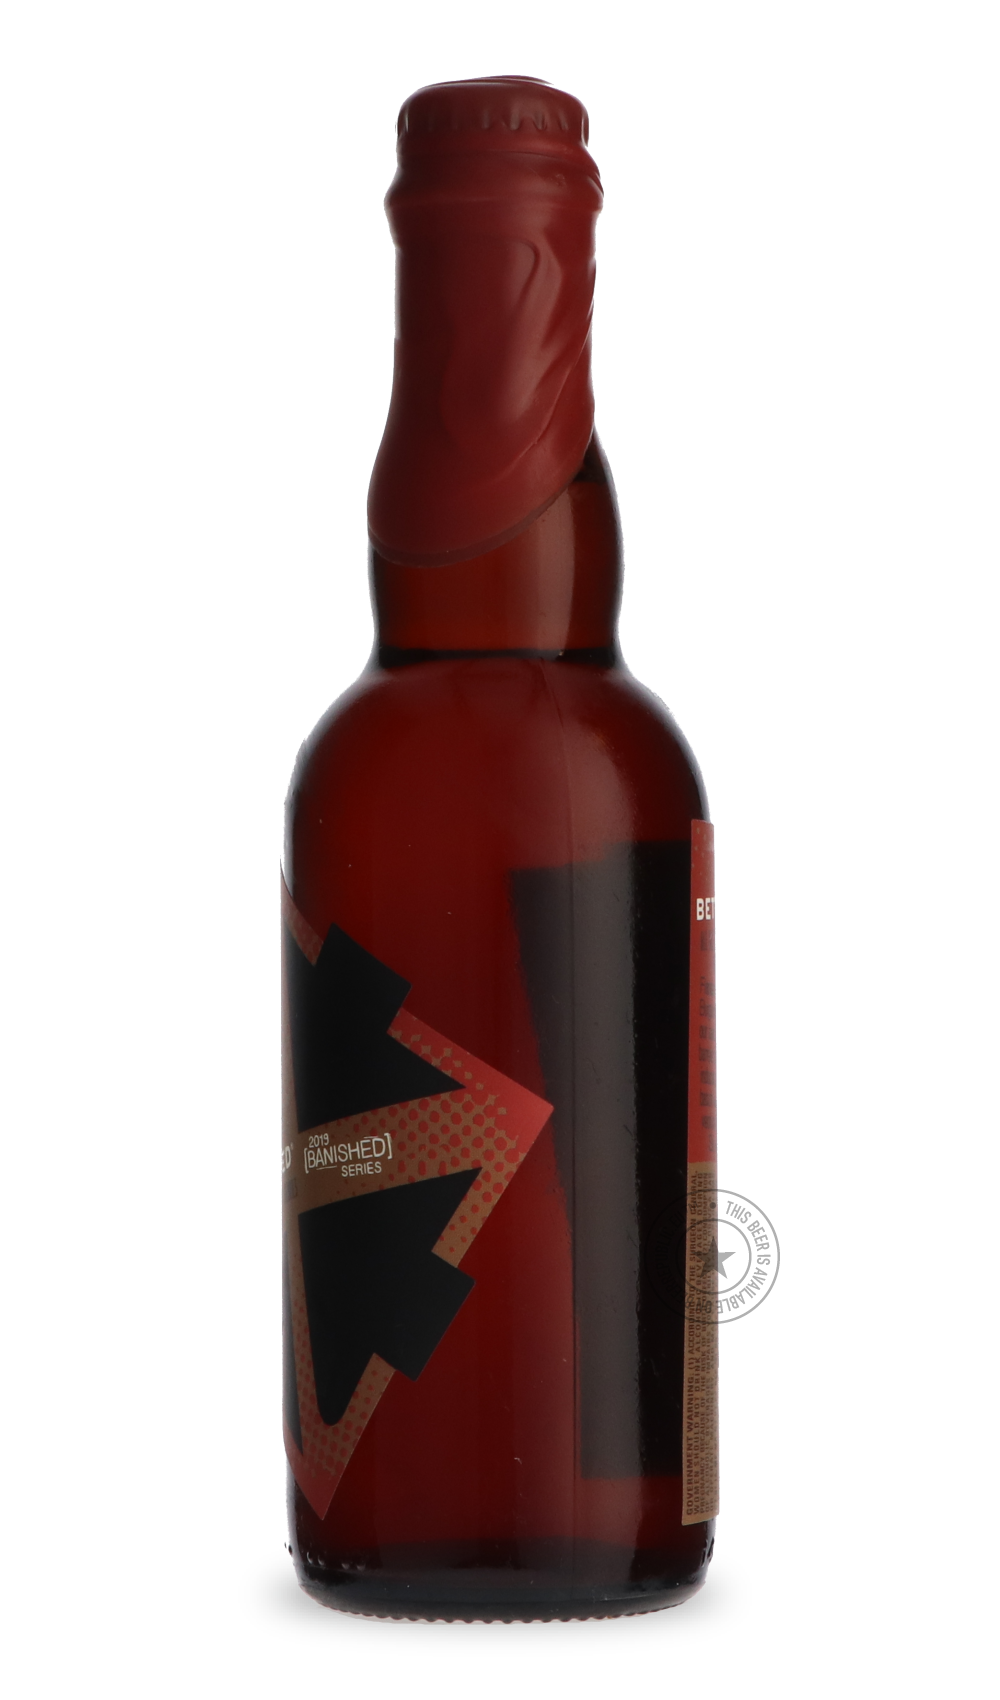 -Crux- Better Of Red-Sour / Wild & Fruity- Only @ Beer Republic - The best online beer store for American & Canadian craft beer - Buy beer online from the USA and Canada - Bier online kopen - Amerikaans bier kopen - Craft beer store - Craft beer kopen - Amerikanisch bier kaufen - Bier online kaufen - Acheter biere online - IPA - Stout - Porter - New England IPA - Hazy IPA - Imperial Stout - Barrel Aged - Barrel Aged Imperial Stout - Brown - Dark beer - Blond - Blonde - Pilsner - Lager - Wheat - Weizen - Amb